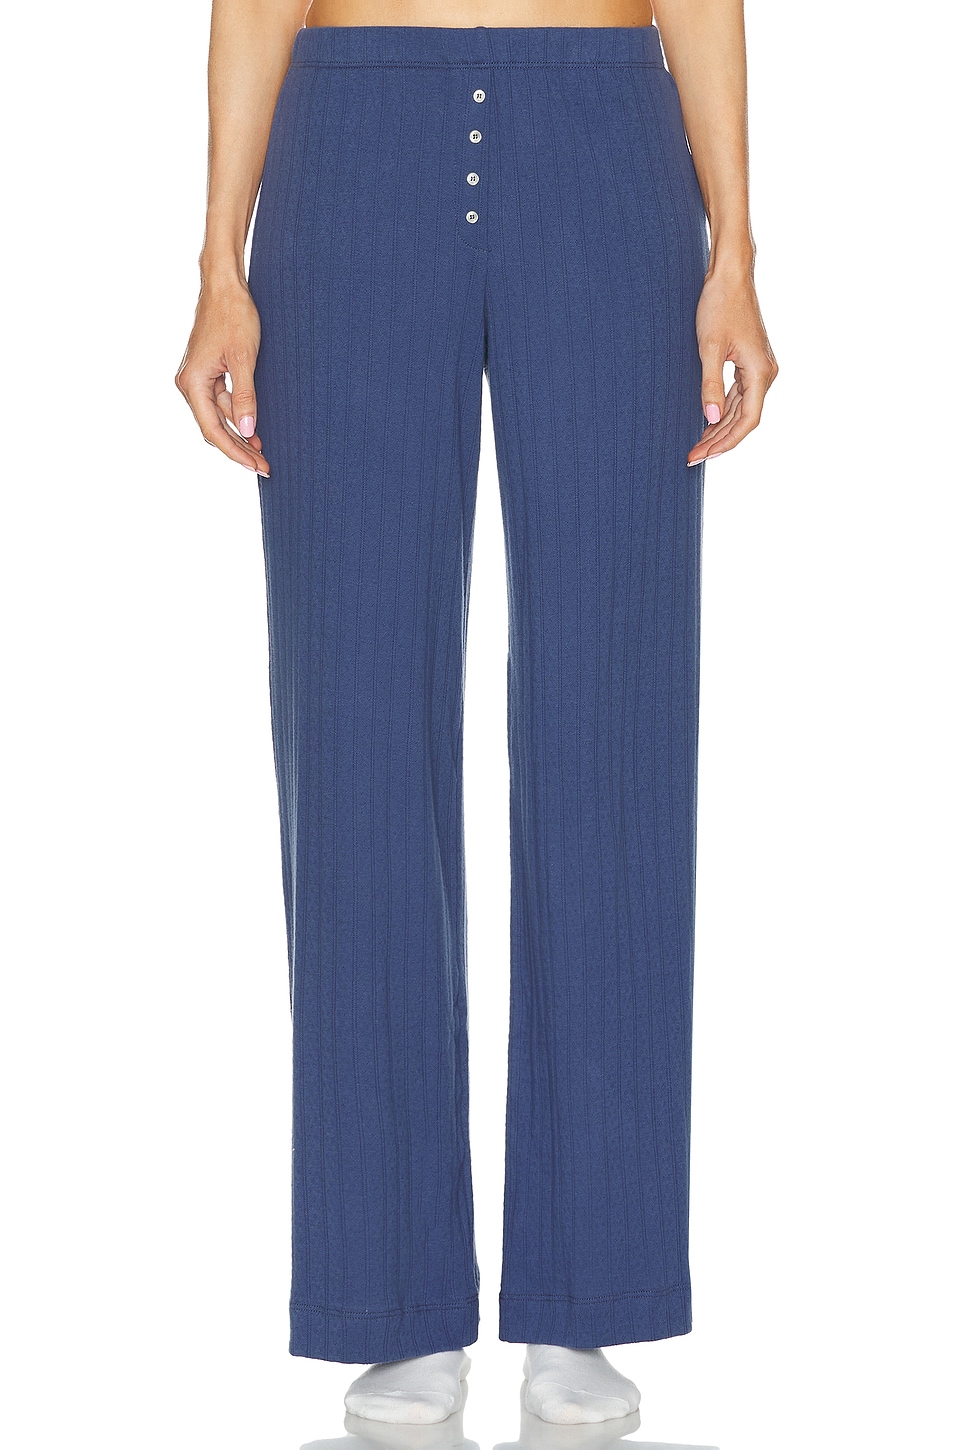 Image 1 of LESET Pointelle Boxer Pant in Steel Blue